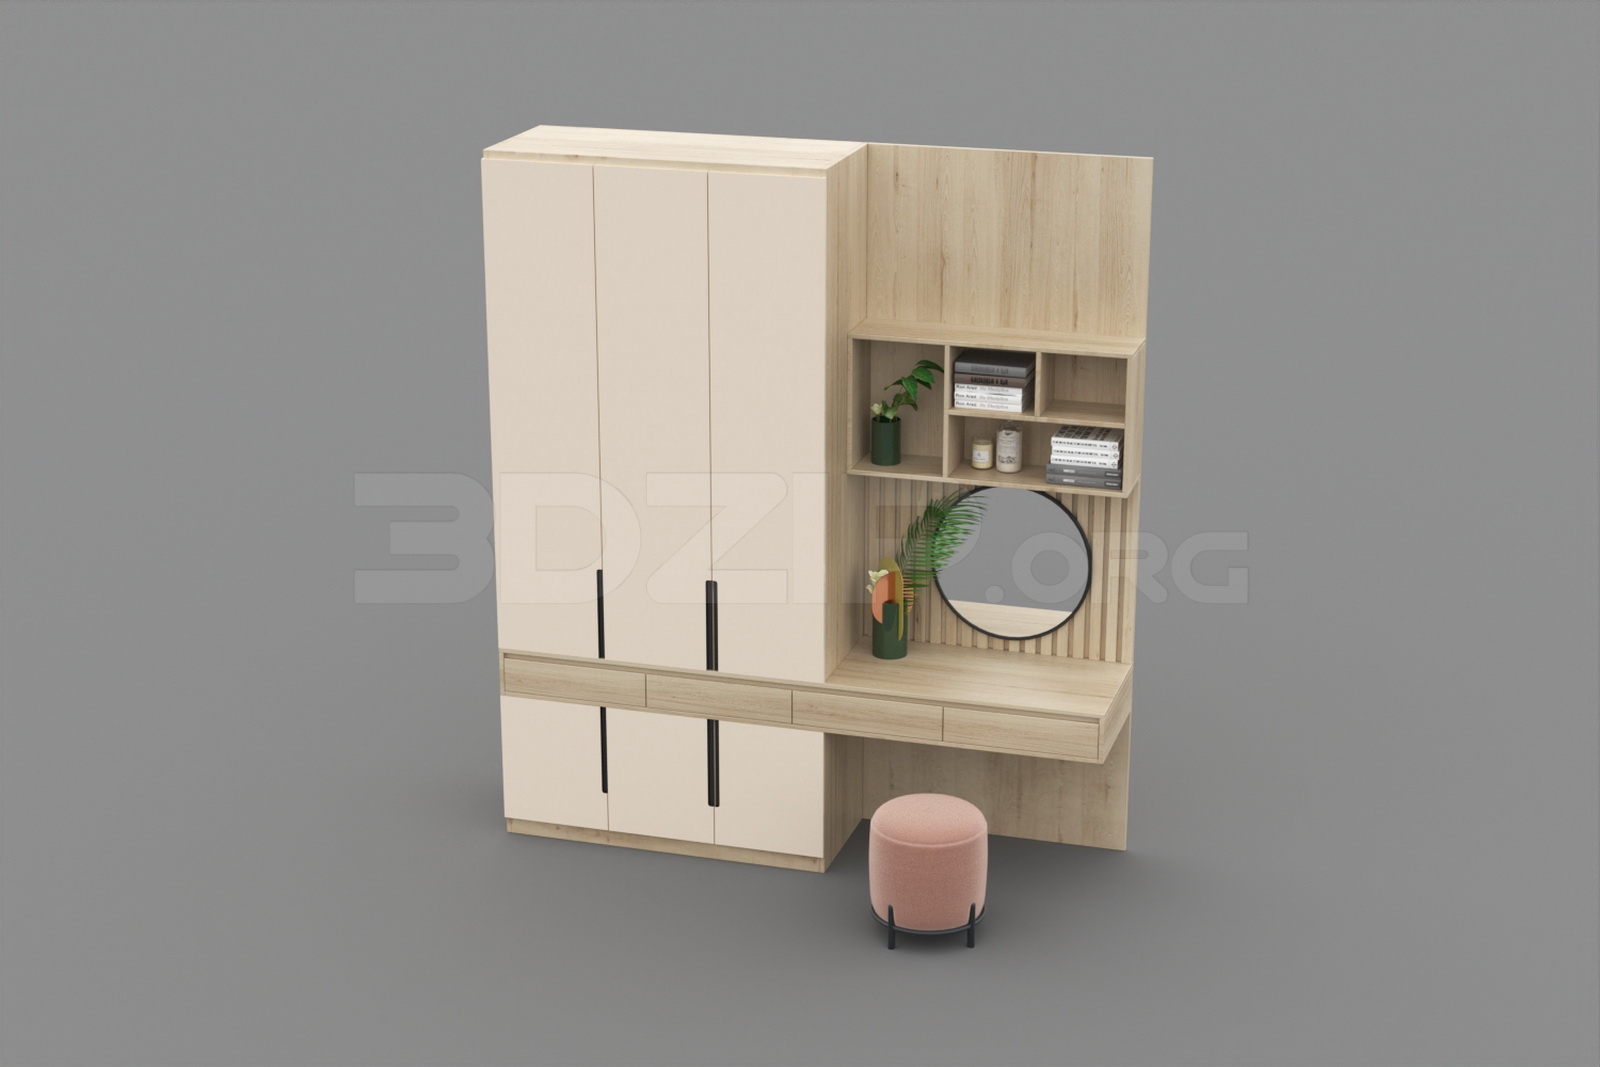 691. Download Free Dressing Table Model By Tuan An